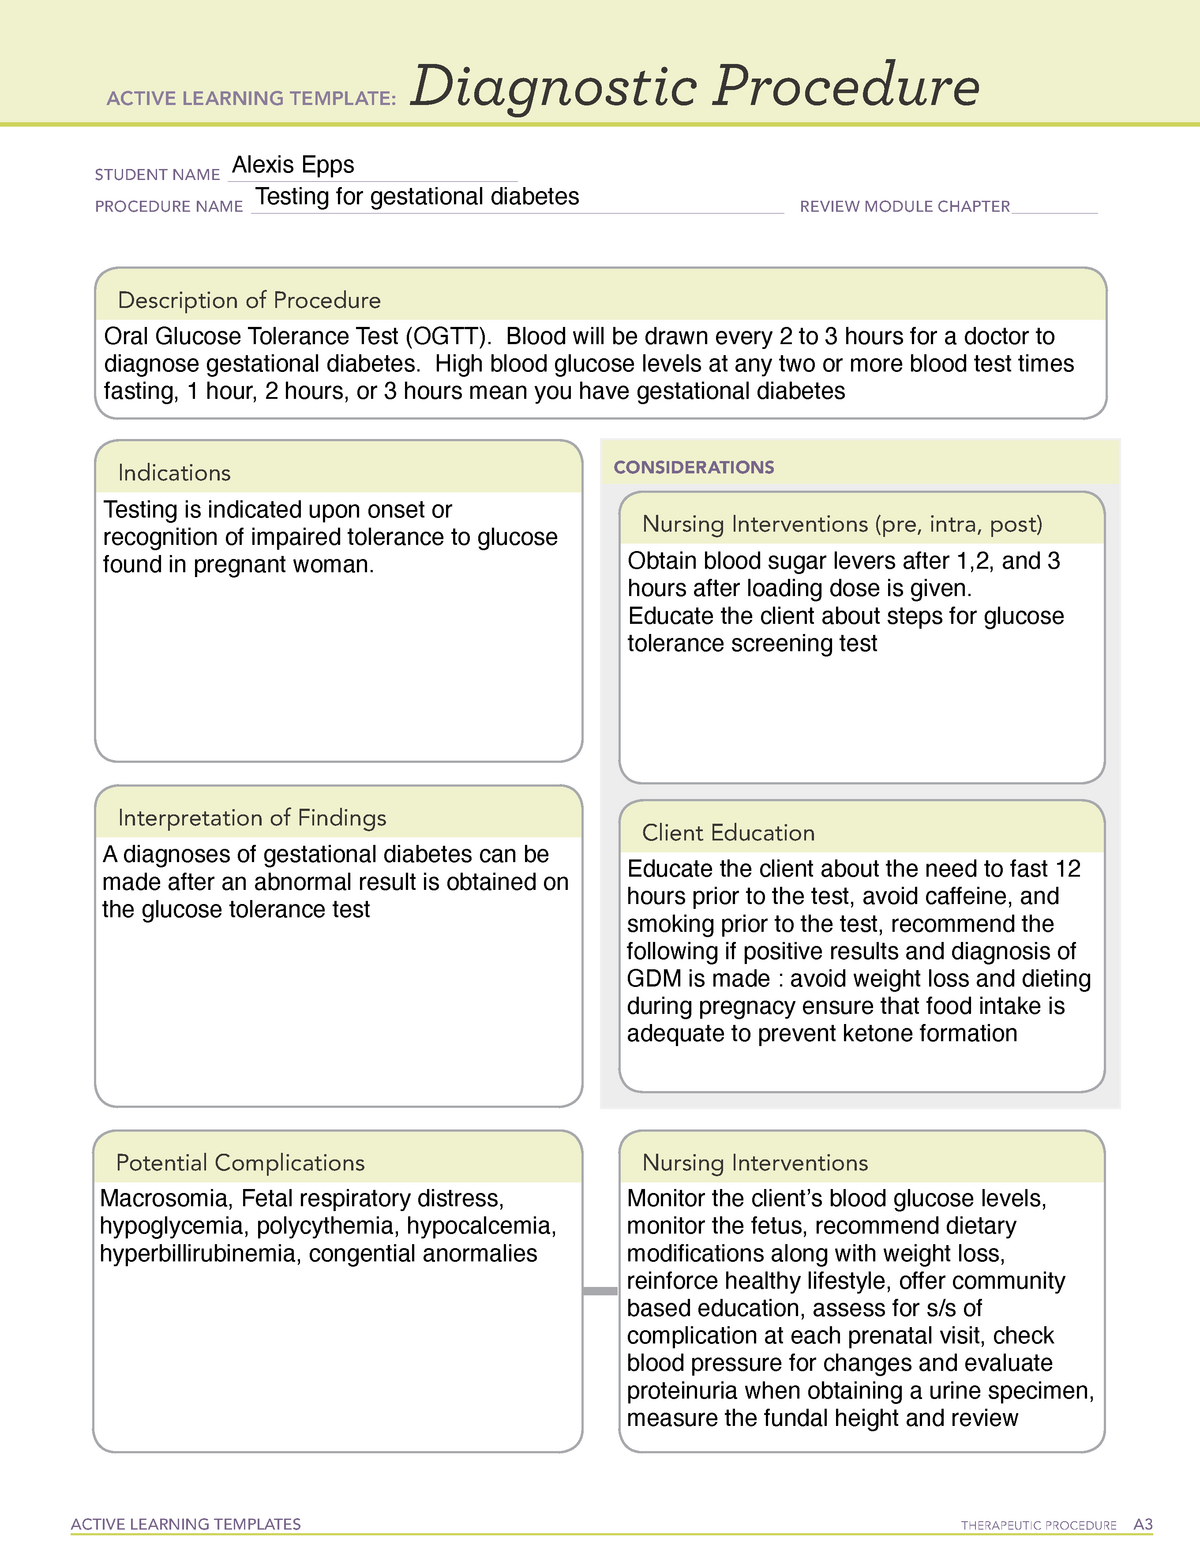 active-learning-template-diagnostic-procedure-printable-word-searches